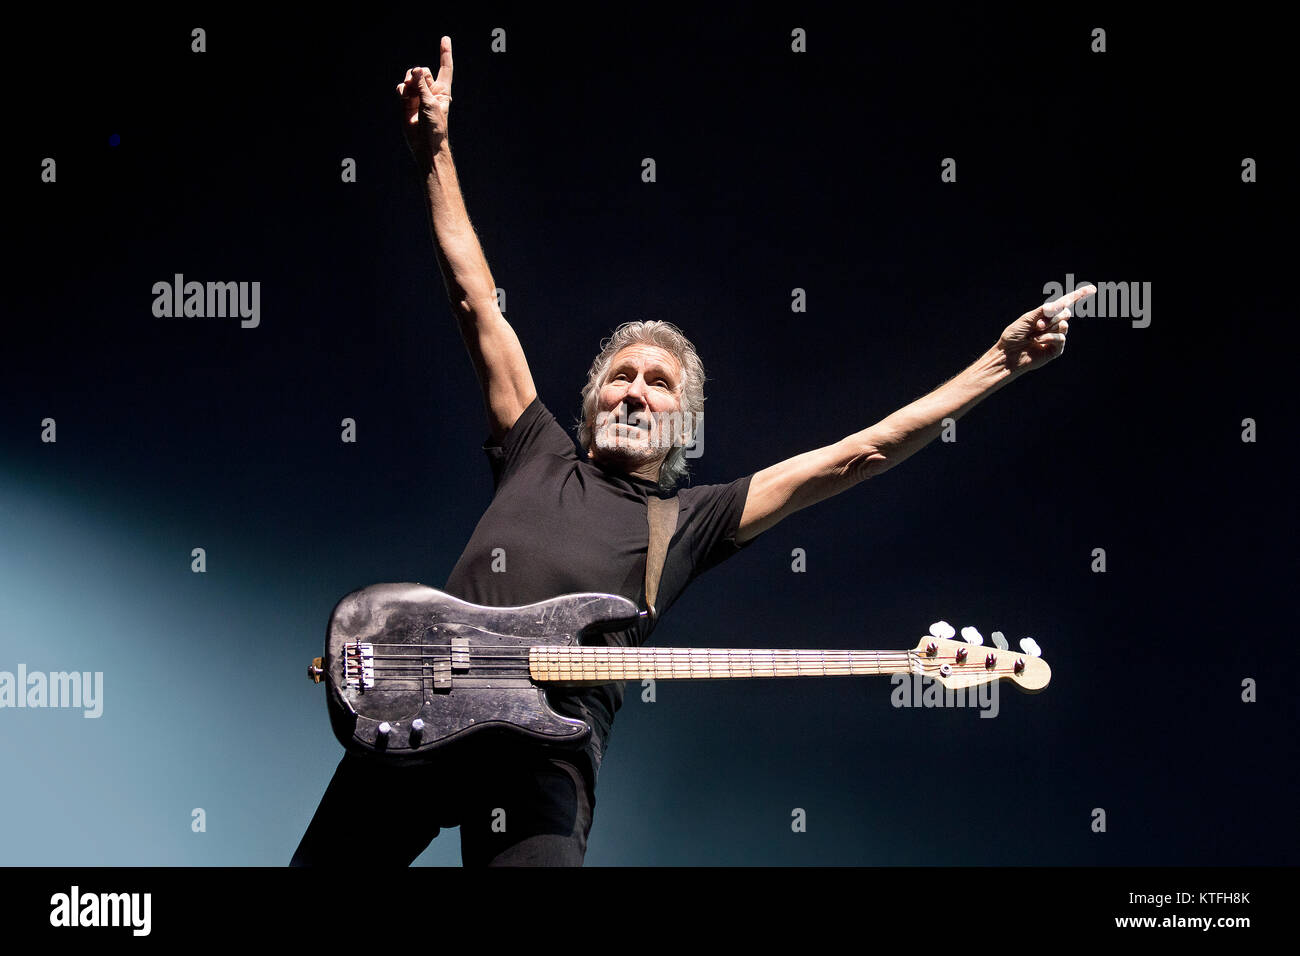 The British singer, songwriter and musician Roger Waters performs a live concert at Telenor Arena in Oslo. Roger Waters is well known as the co-founder and band member of the progressive rock band Pink Floyd. Norway, 14/08 2013. Stock Photo